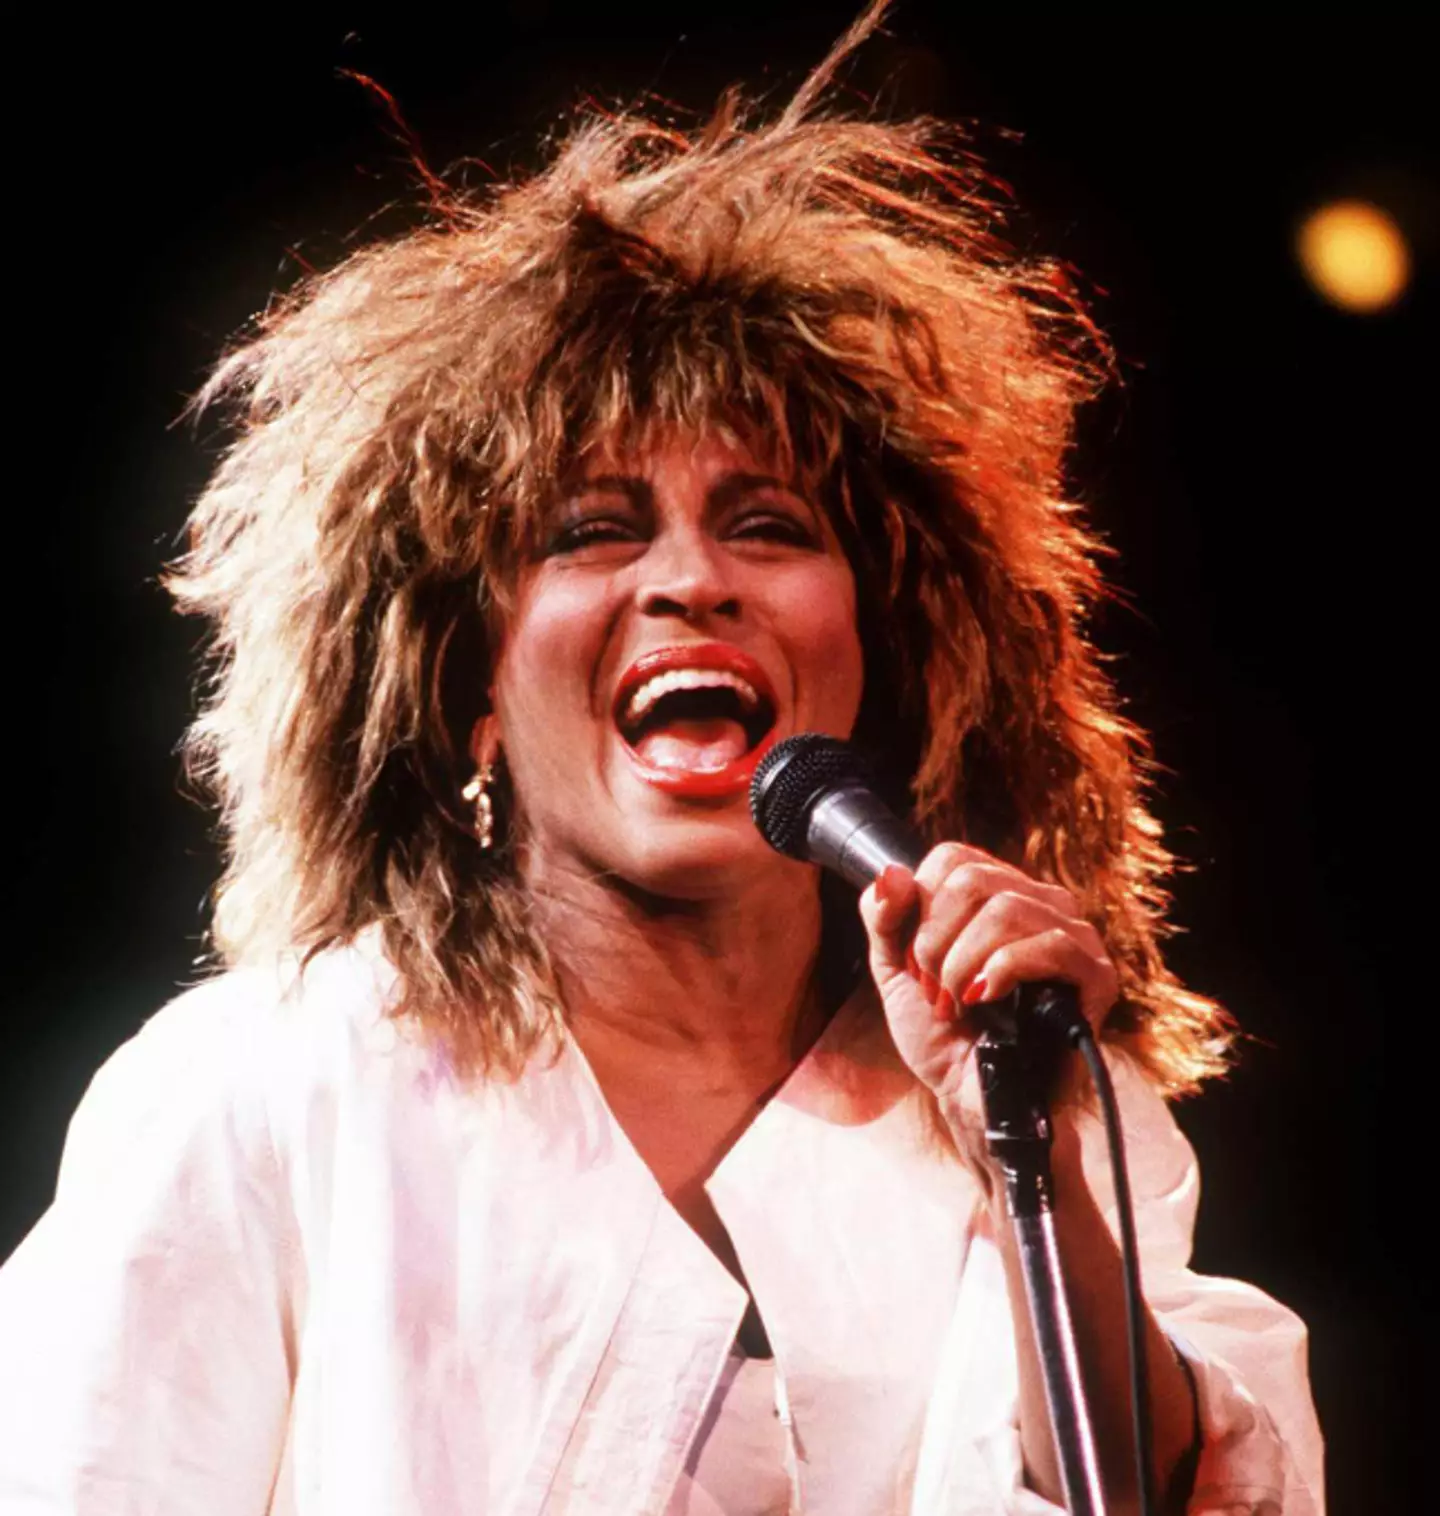 Tina Turner died at her home in Switzerland.